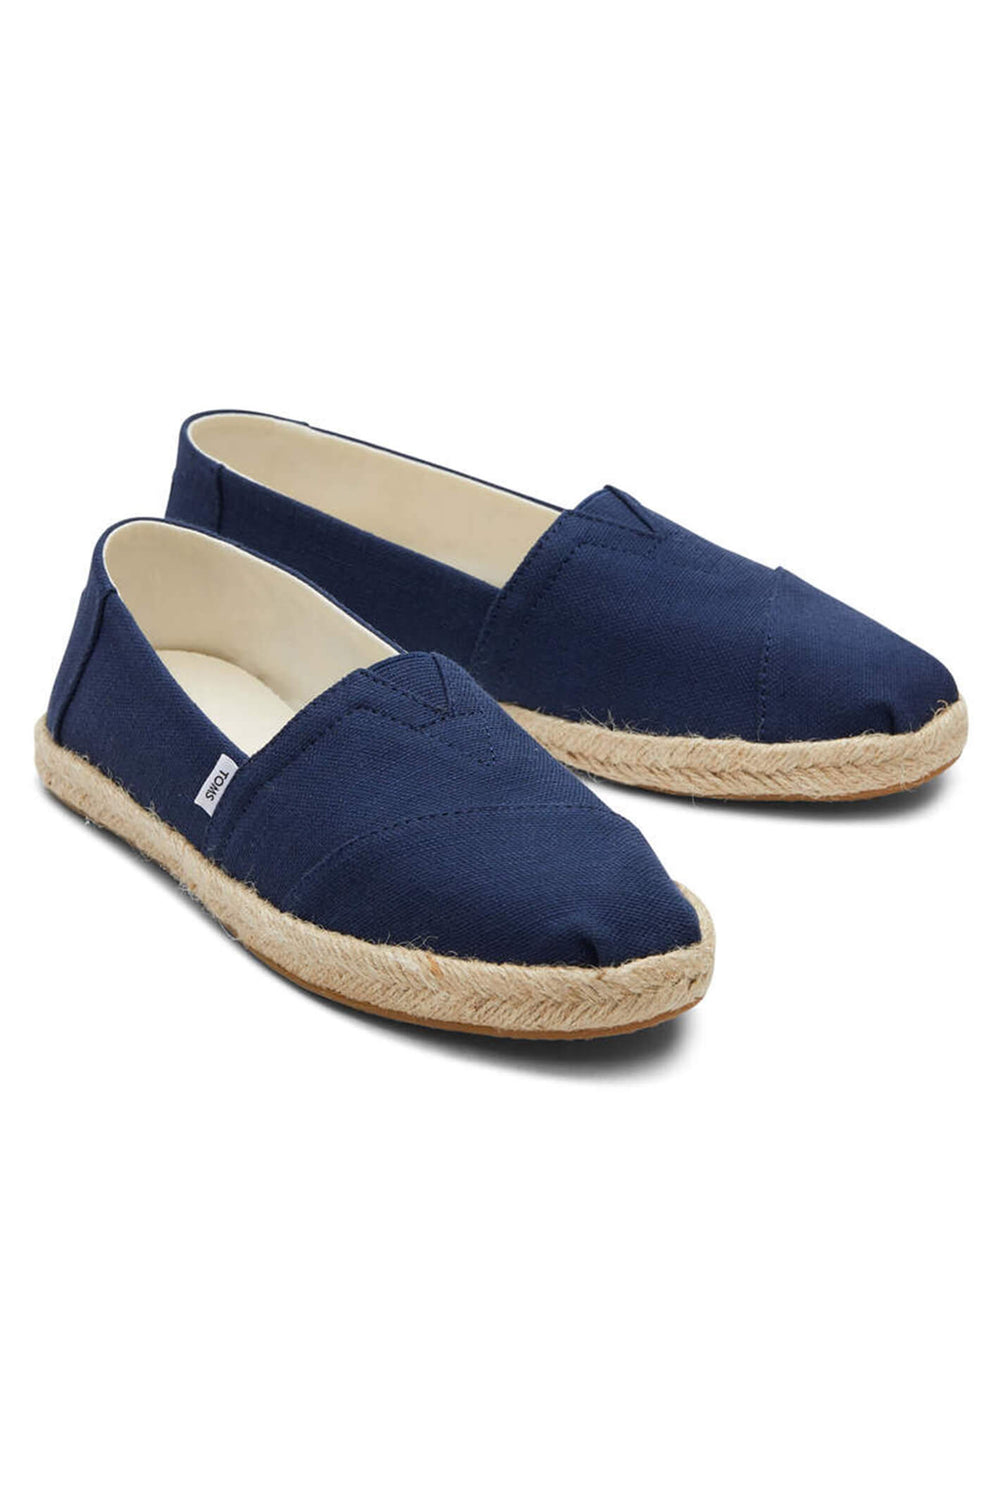 Toms Alpargata 10019674 Navy Recycled Cotton Rope Espadrille - Shirley Allum Boutique